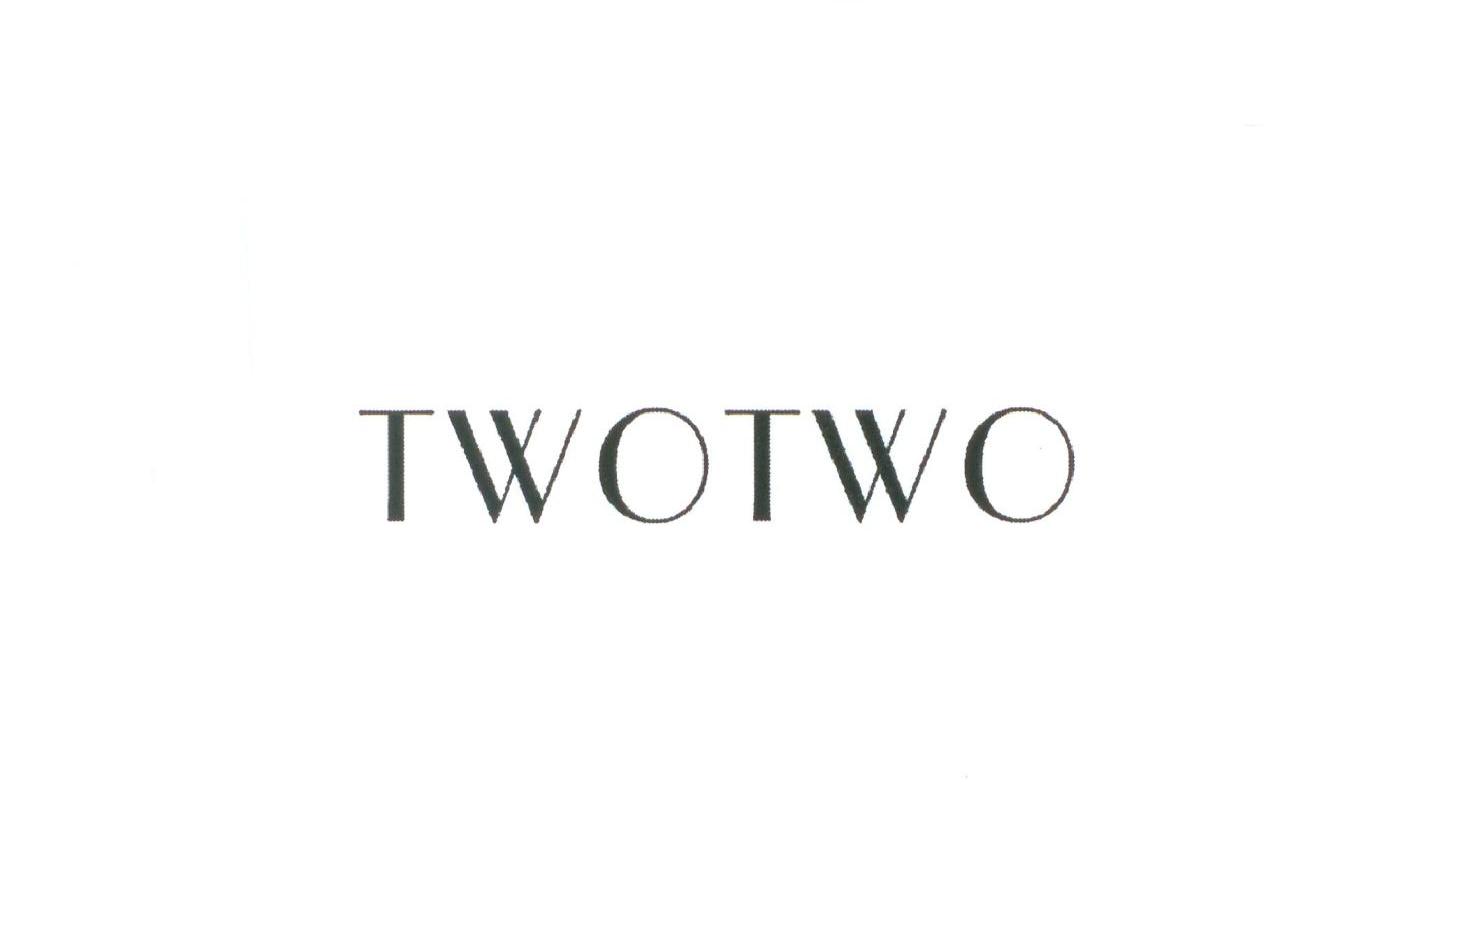 TWOTWO